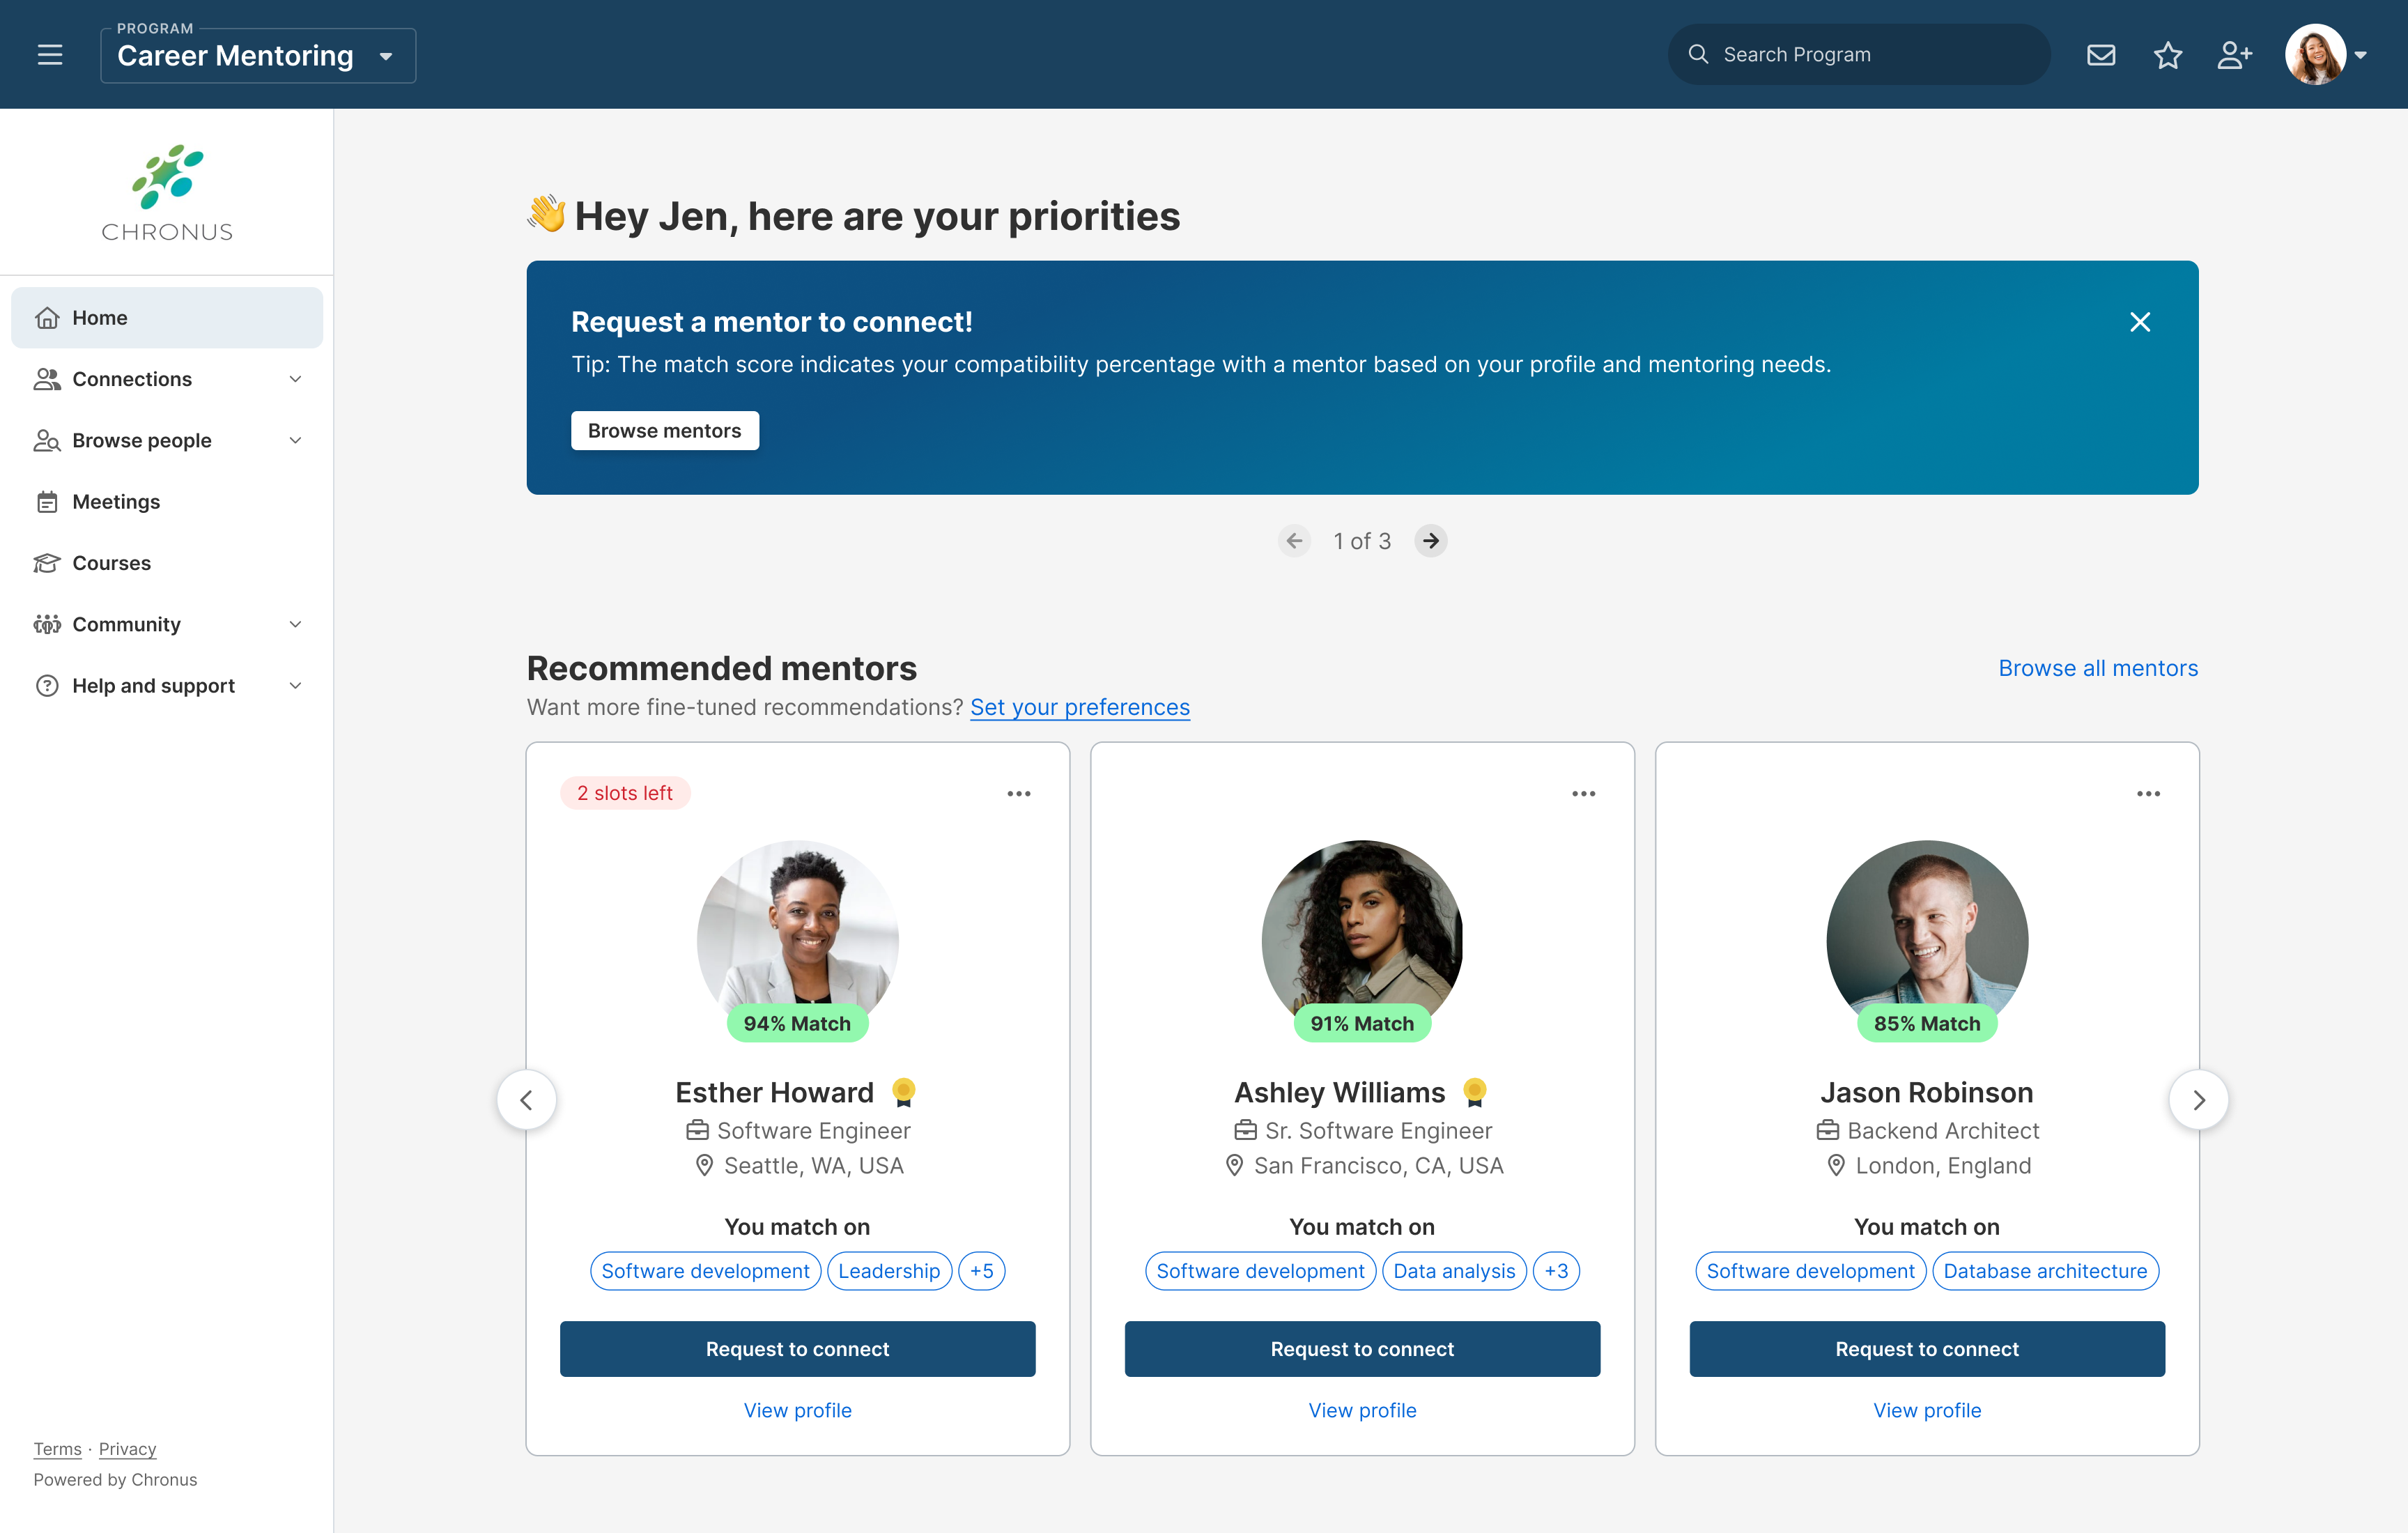 Personalized mentor recommendations based on participant profiles help increase the success rate of matches. Customize the matching criteria to meet your unique needs and objectives (skills, employee demographics, tenure, location, etc). 